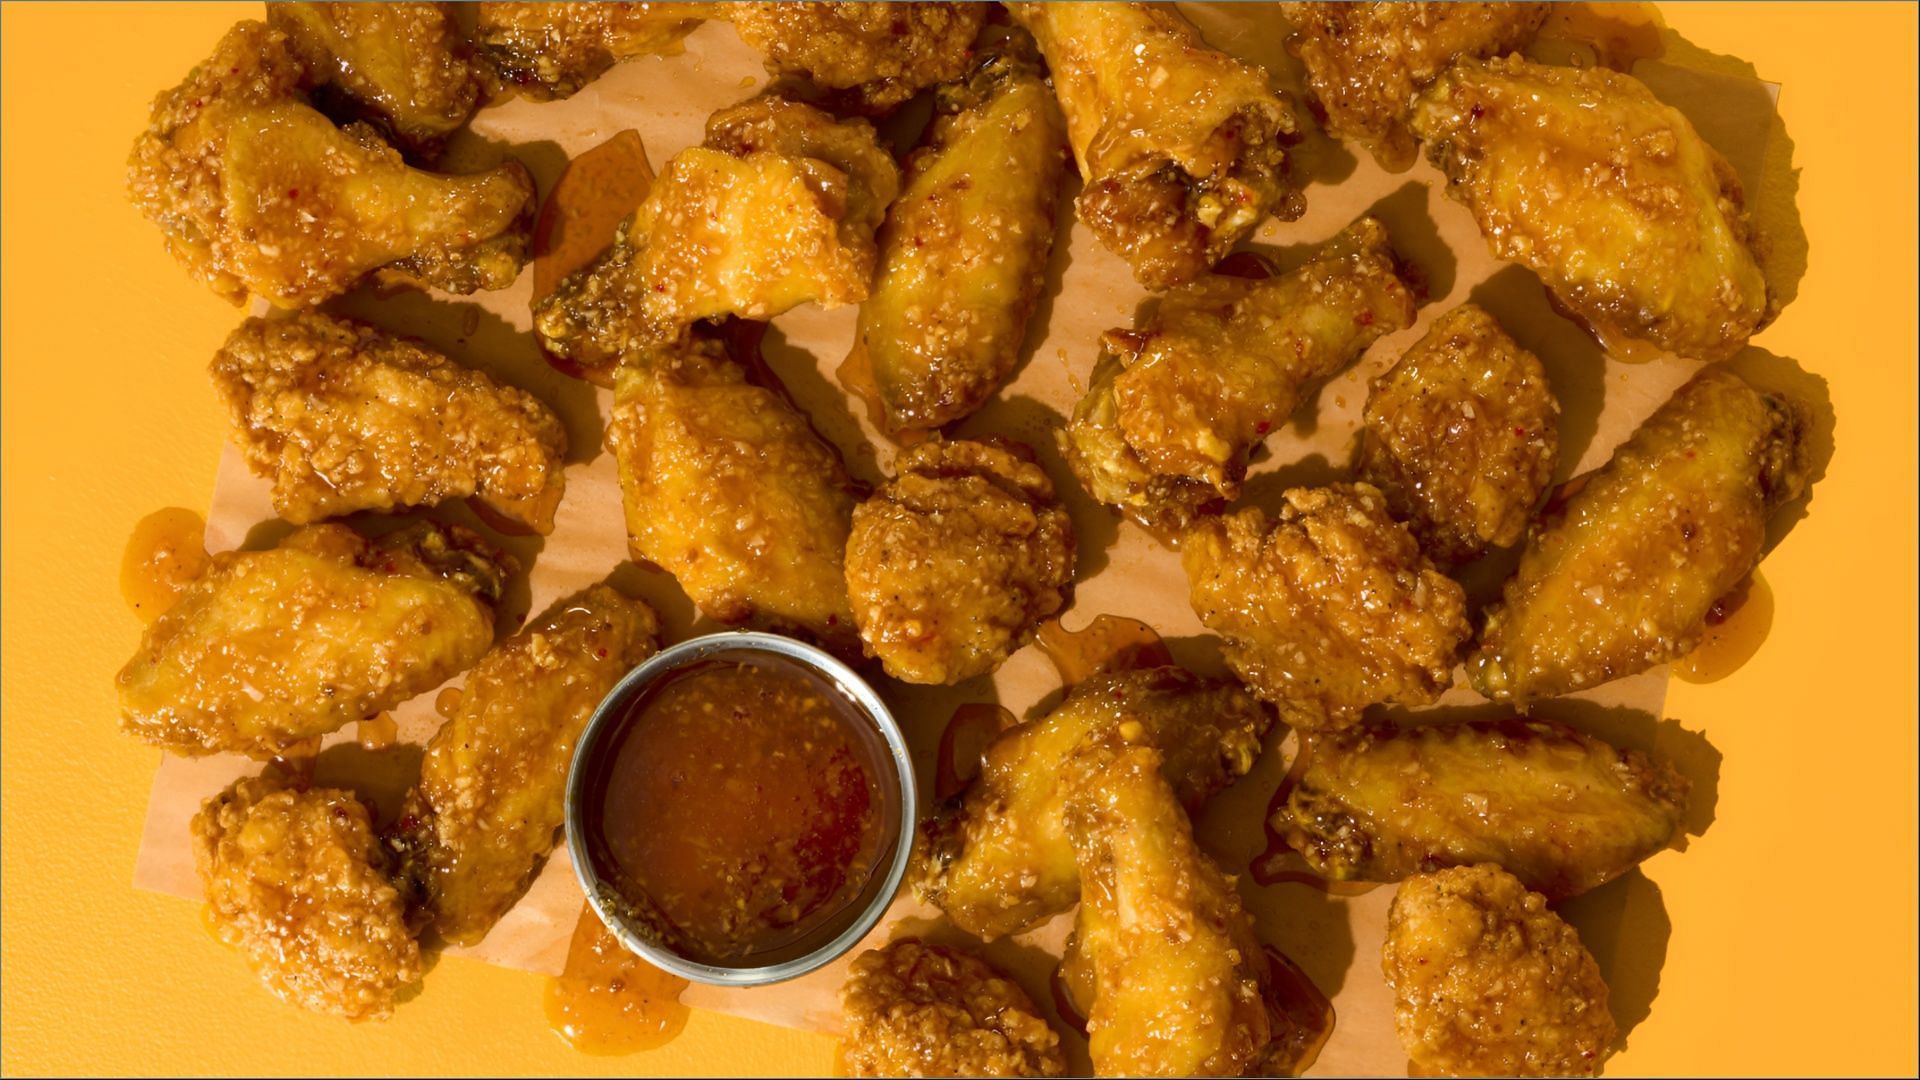 Buffalo Wild Wings launches new Honey-based sauces (Image via Buffalo Wild Wings / Inspire Brands)